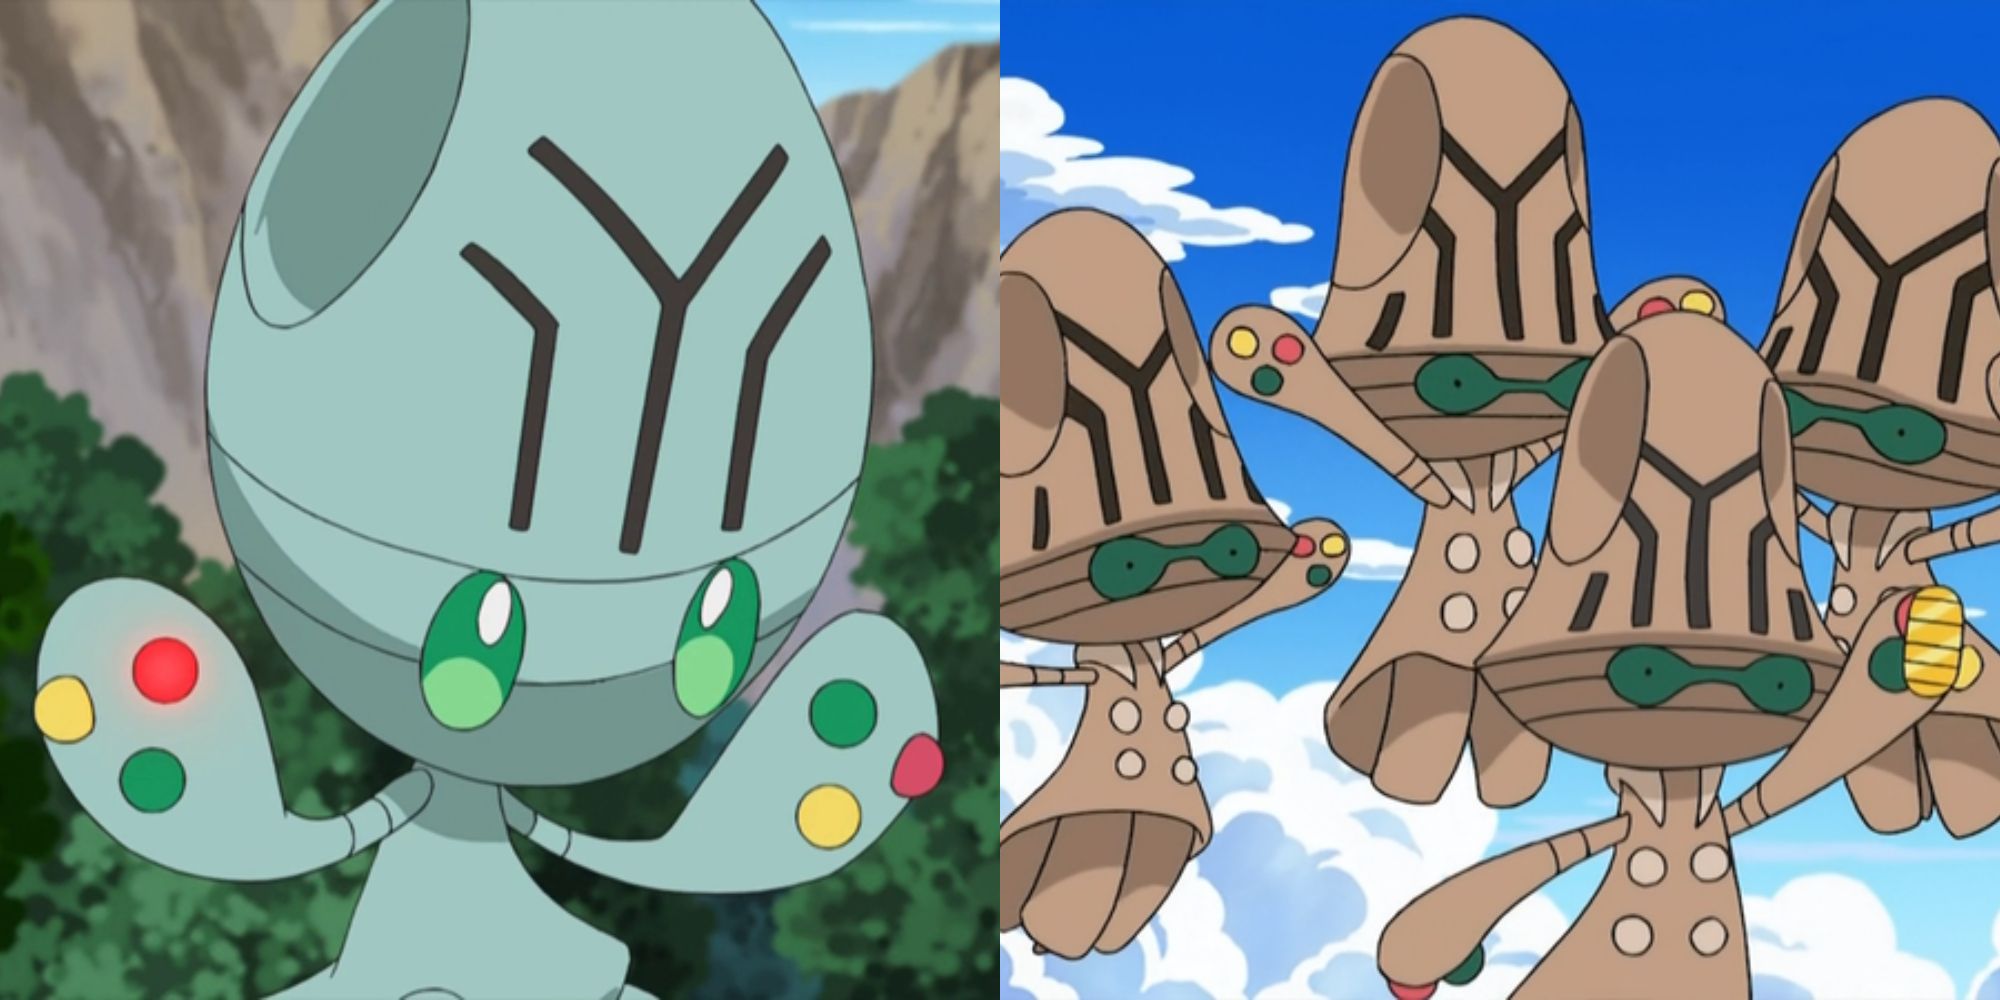 Split image showing Elgyem and a group of Beheeyem in the Pokémon anime.